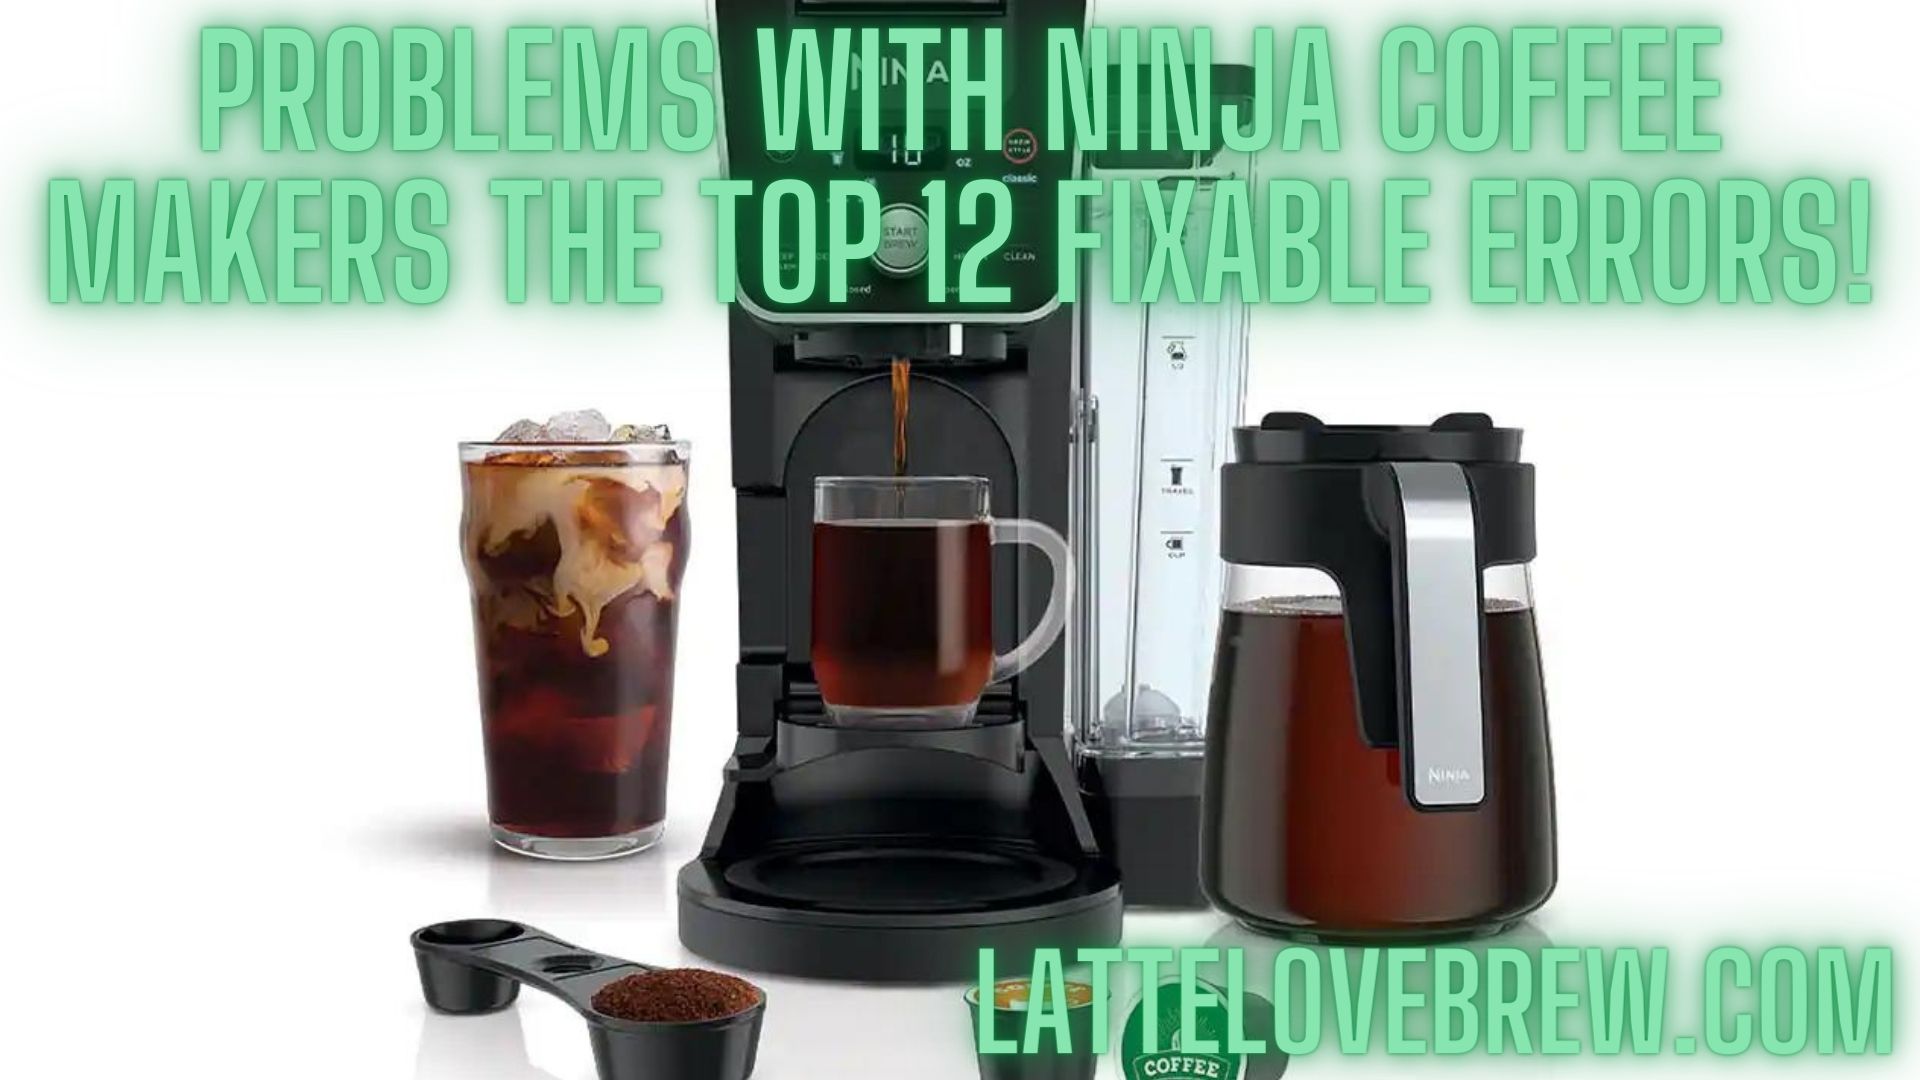 https://lattelovebrew.com/wp-content/uploads/2022/03/Problems-With-Ninja-Coffee-Makers-The-Top-12-Fixable-Errors.jpg